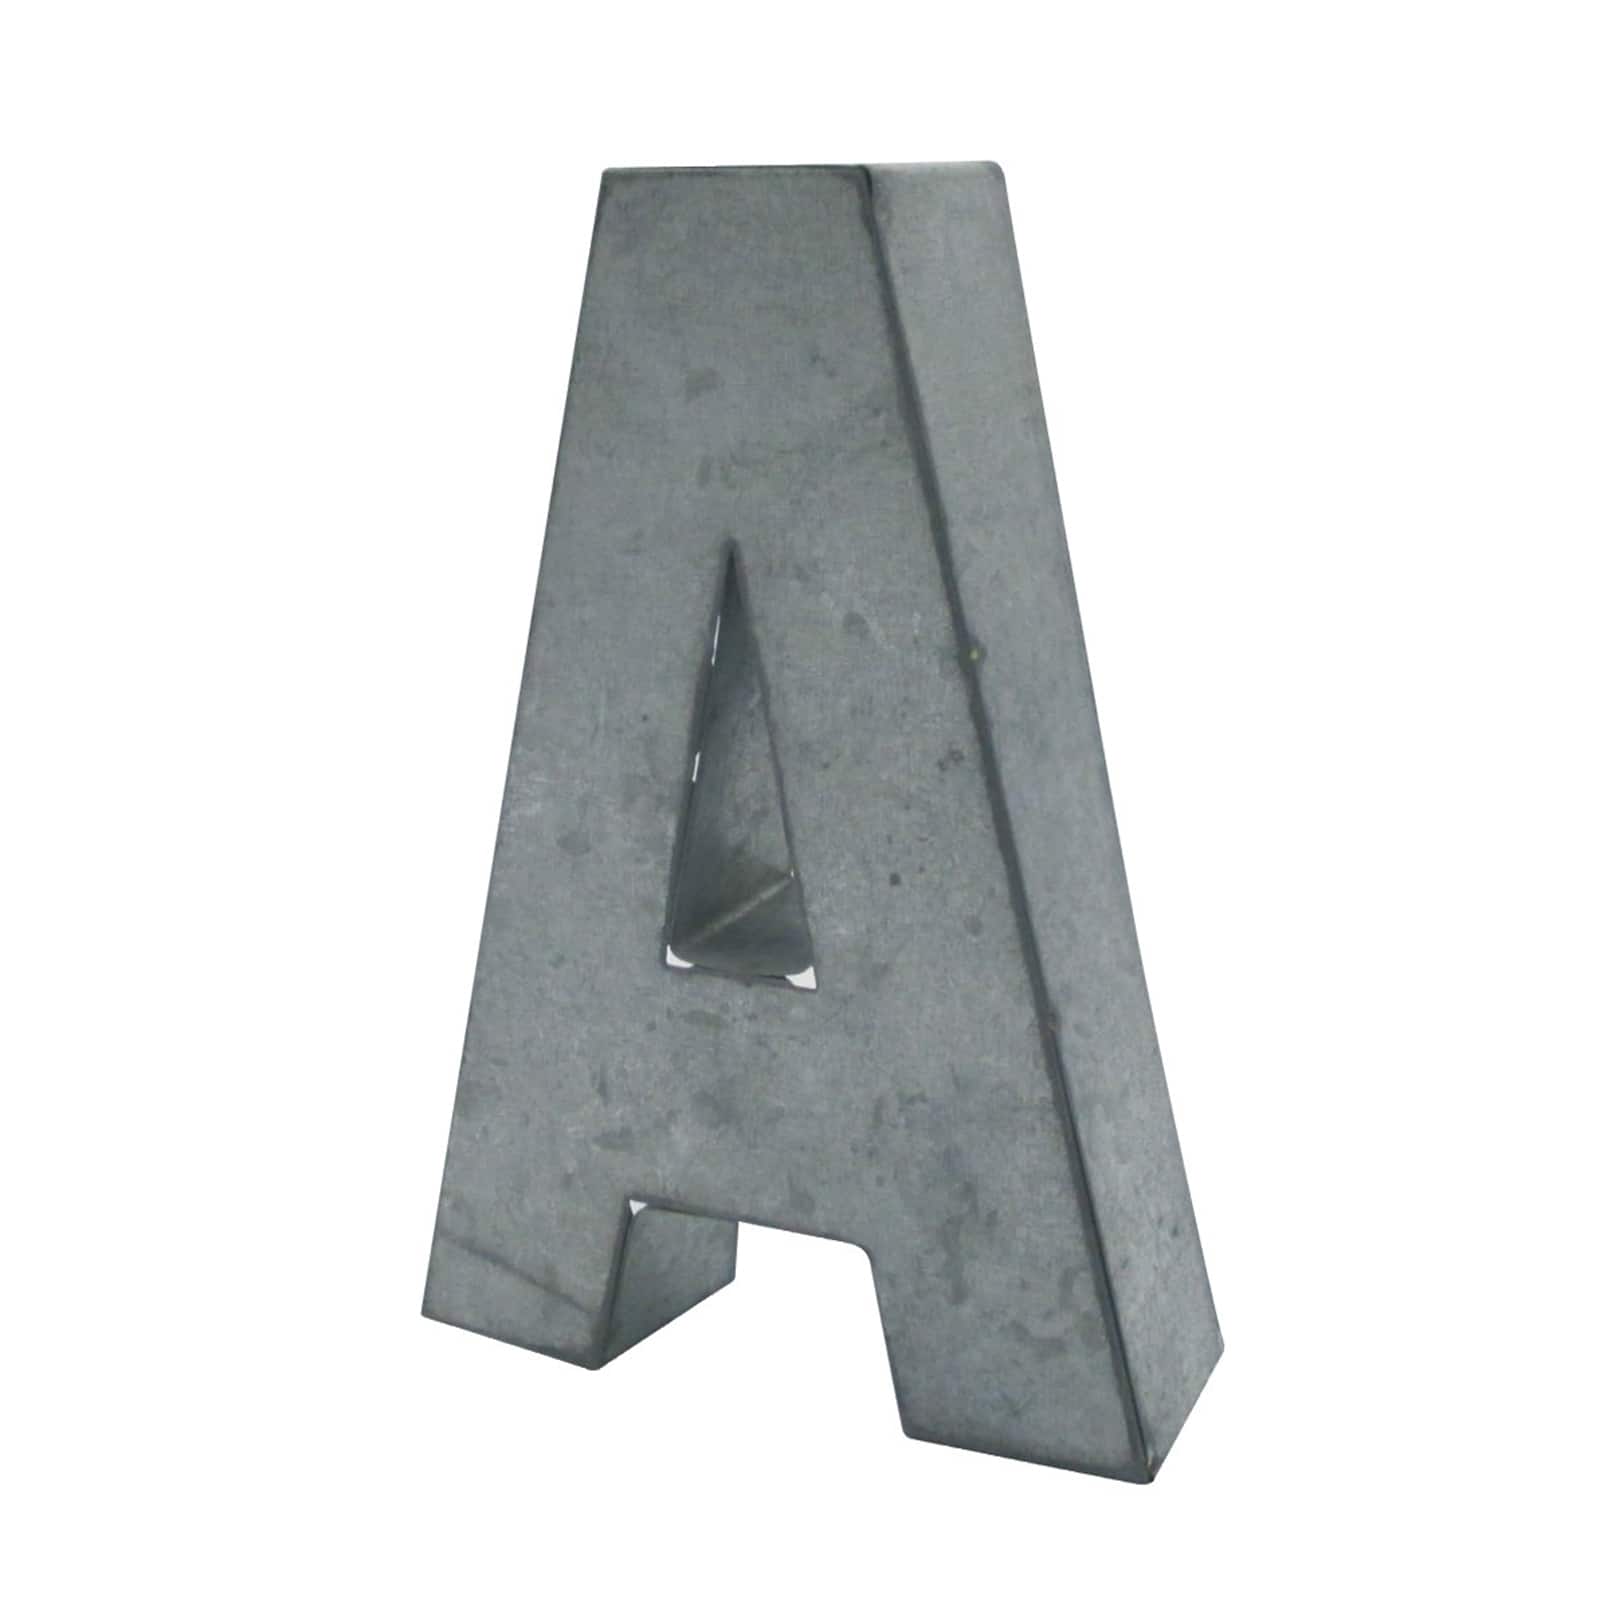 S 5.75 Galvanized 3D Letter by ArtMinds 